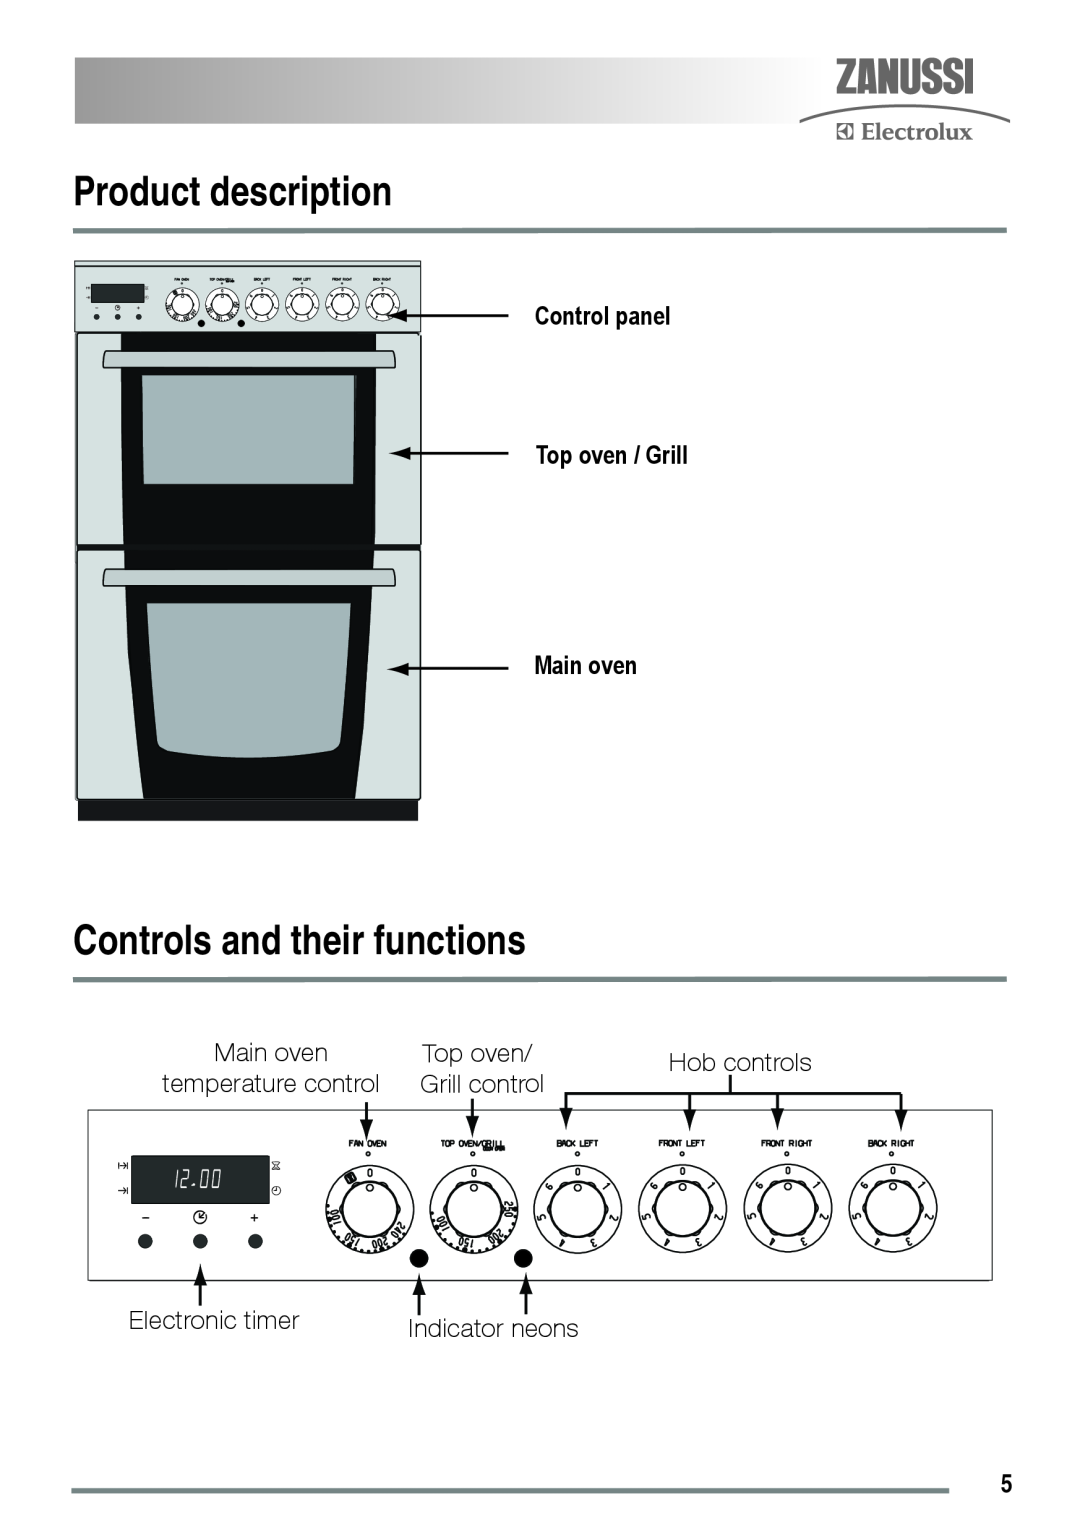 Zanussi ZKC5030 Product description, Controls and their functions, Control panel Top oven / Grill Main oven, Hob controls 